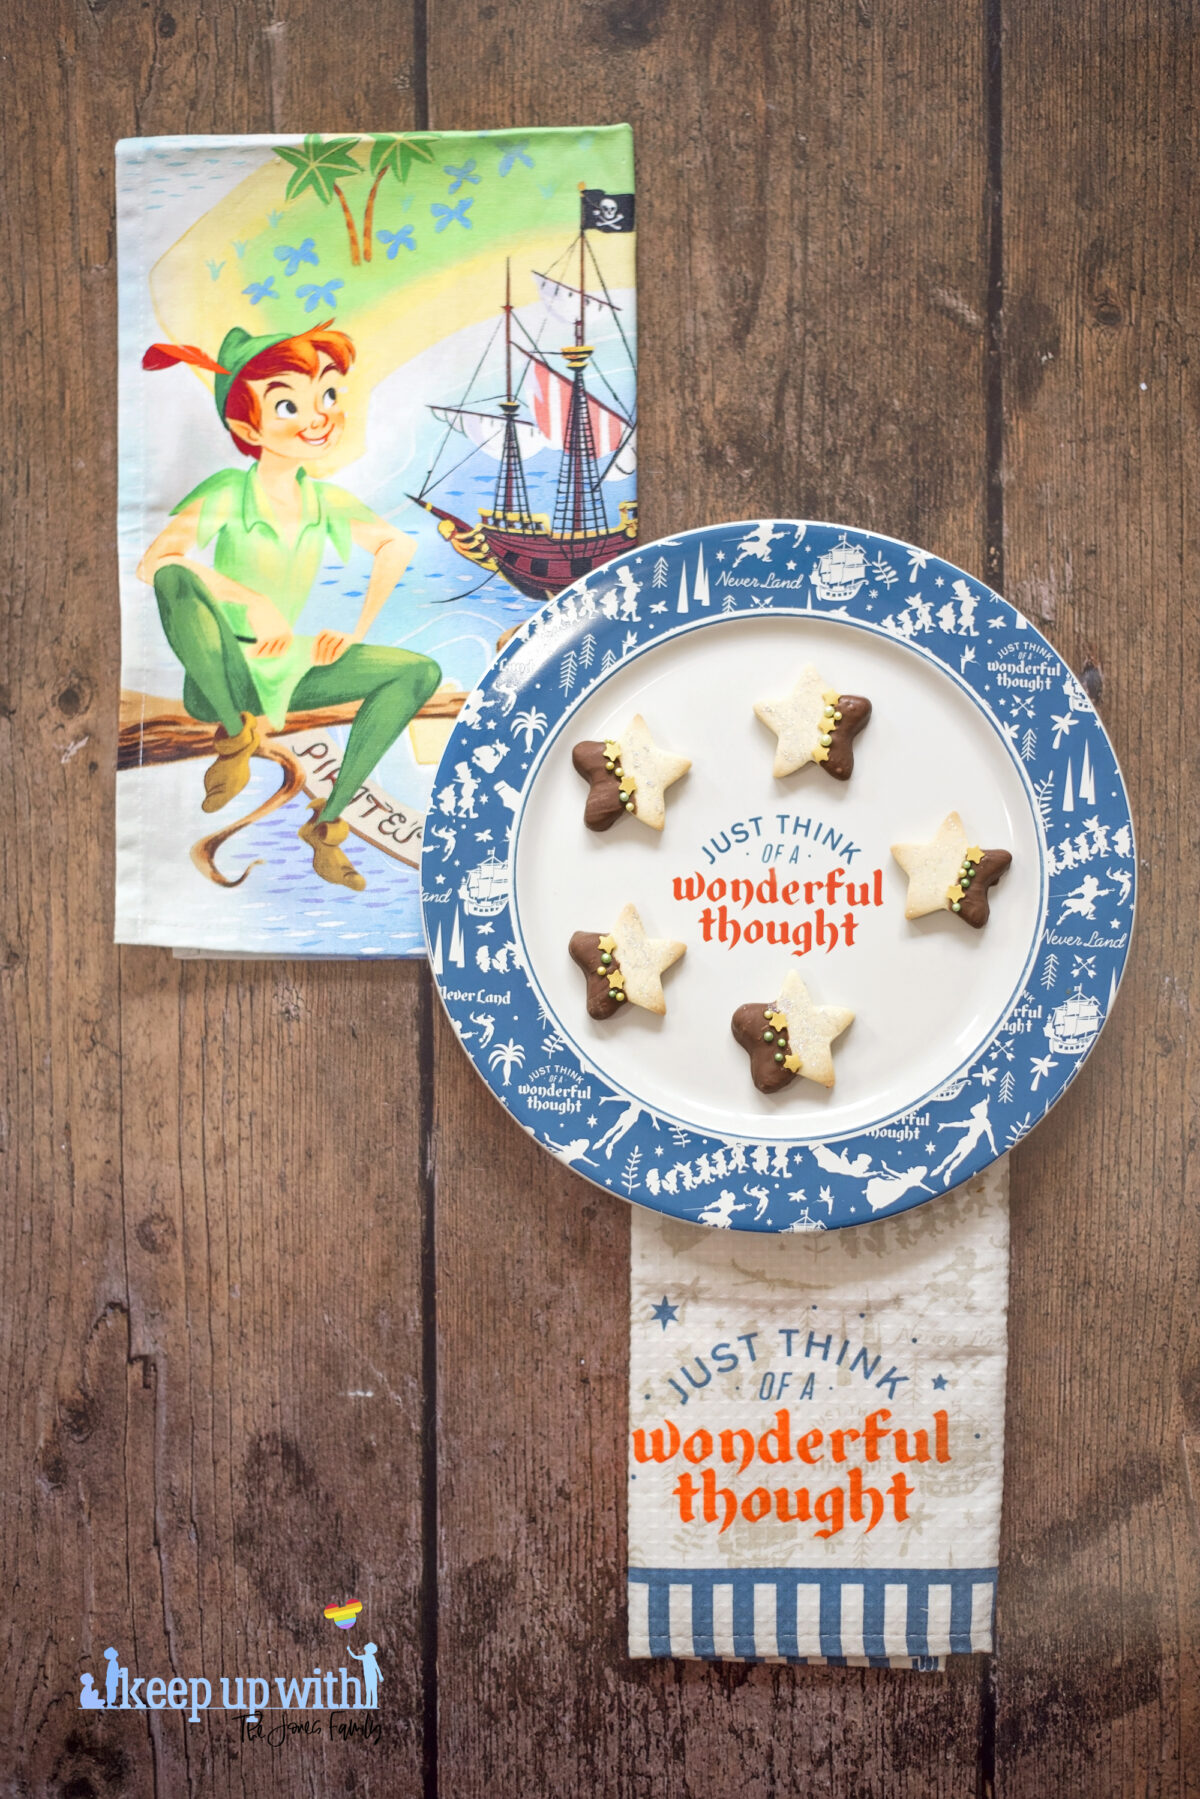 Image shows a wooden tabletop with ShopDisneyUK's Peter Pan tea towel set and a Peter Pan dinner plate reading "just think of a wonderful thought" on it.  On the Disney plate are small star shaped biscuits half of each Peter Pan Second Star to the Right Biscuit is dipped in chocolate and  the other is sprinkled with silver edible glitter.  The dividing line is decorated with yellow star sprinkles and green pearl shaped sprinkles. Image by Keep Up With The Jones Family